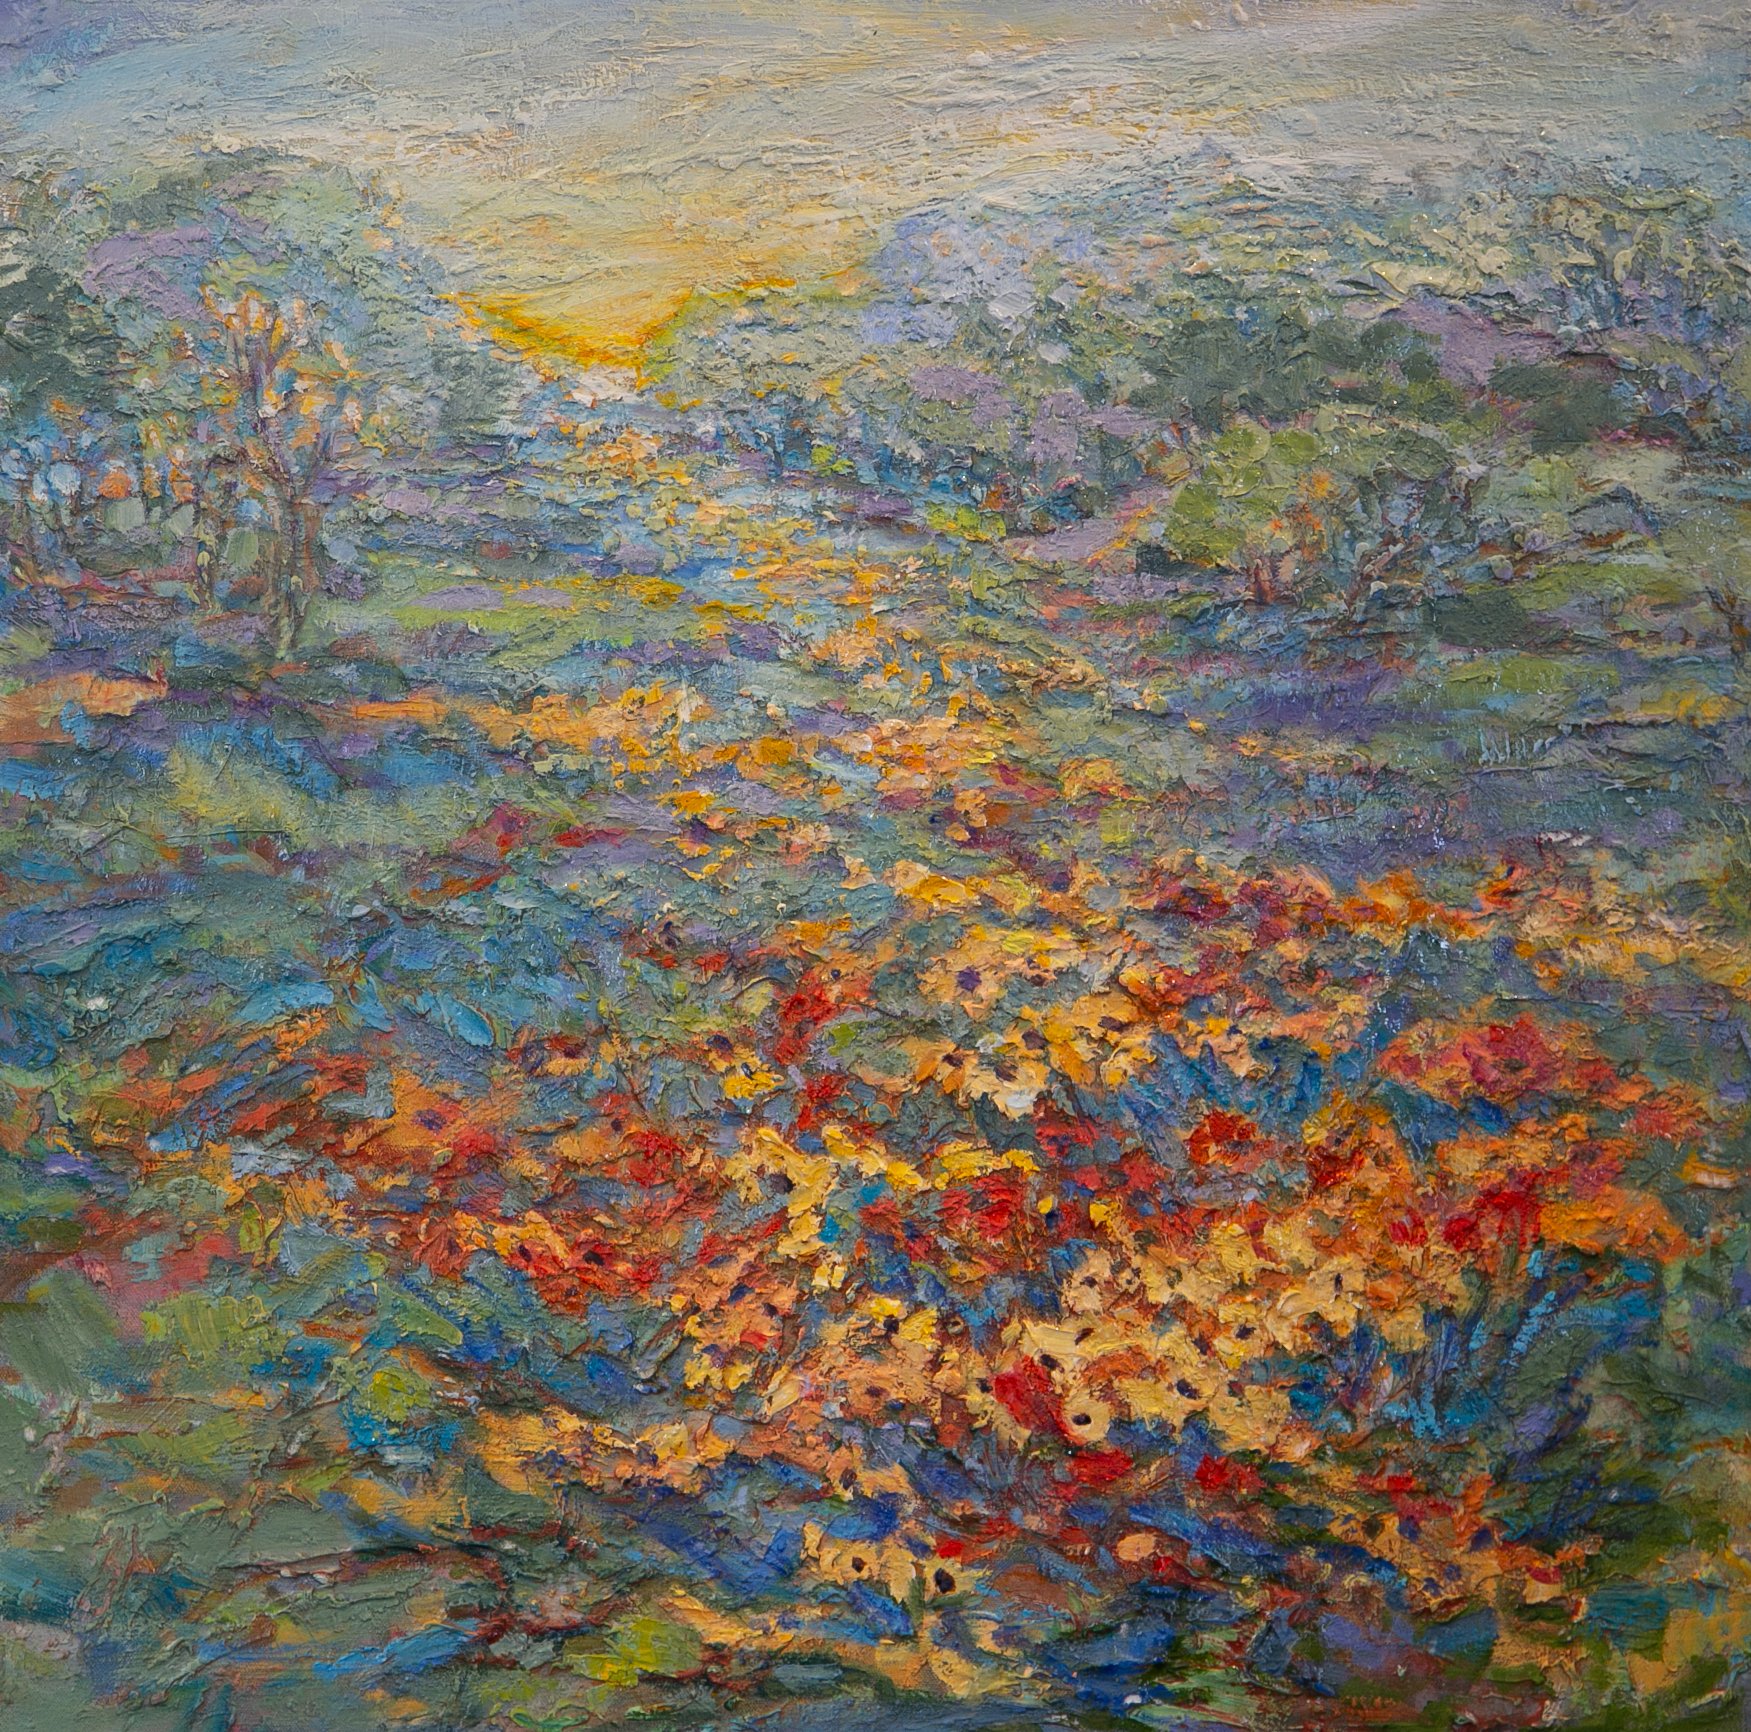   Take Time to See the Flowers   Oil on canvas  30” x 30”   